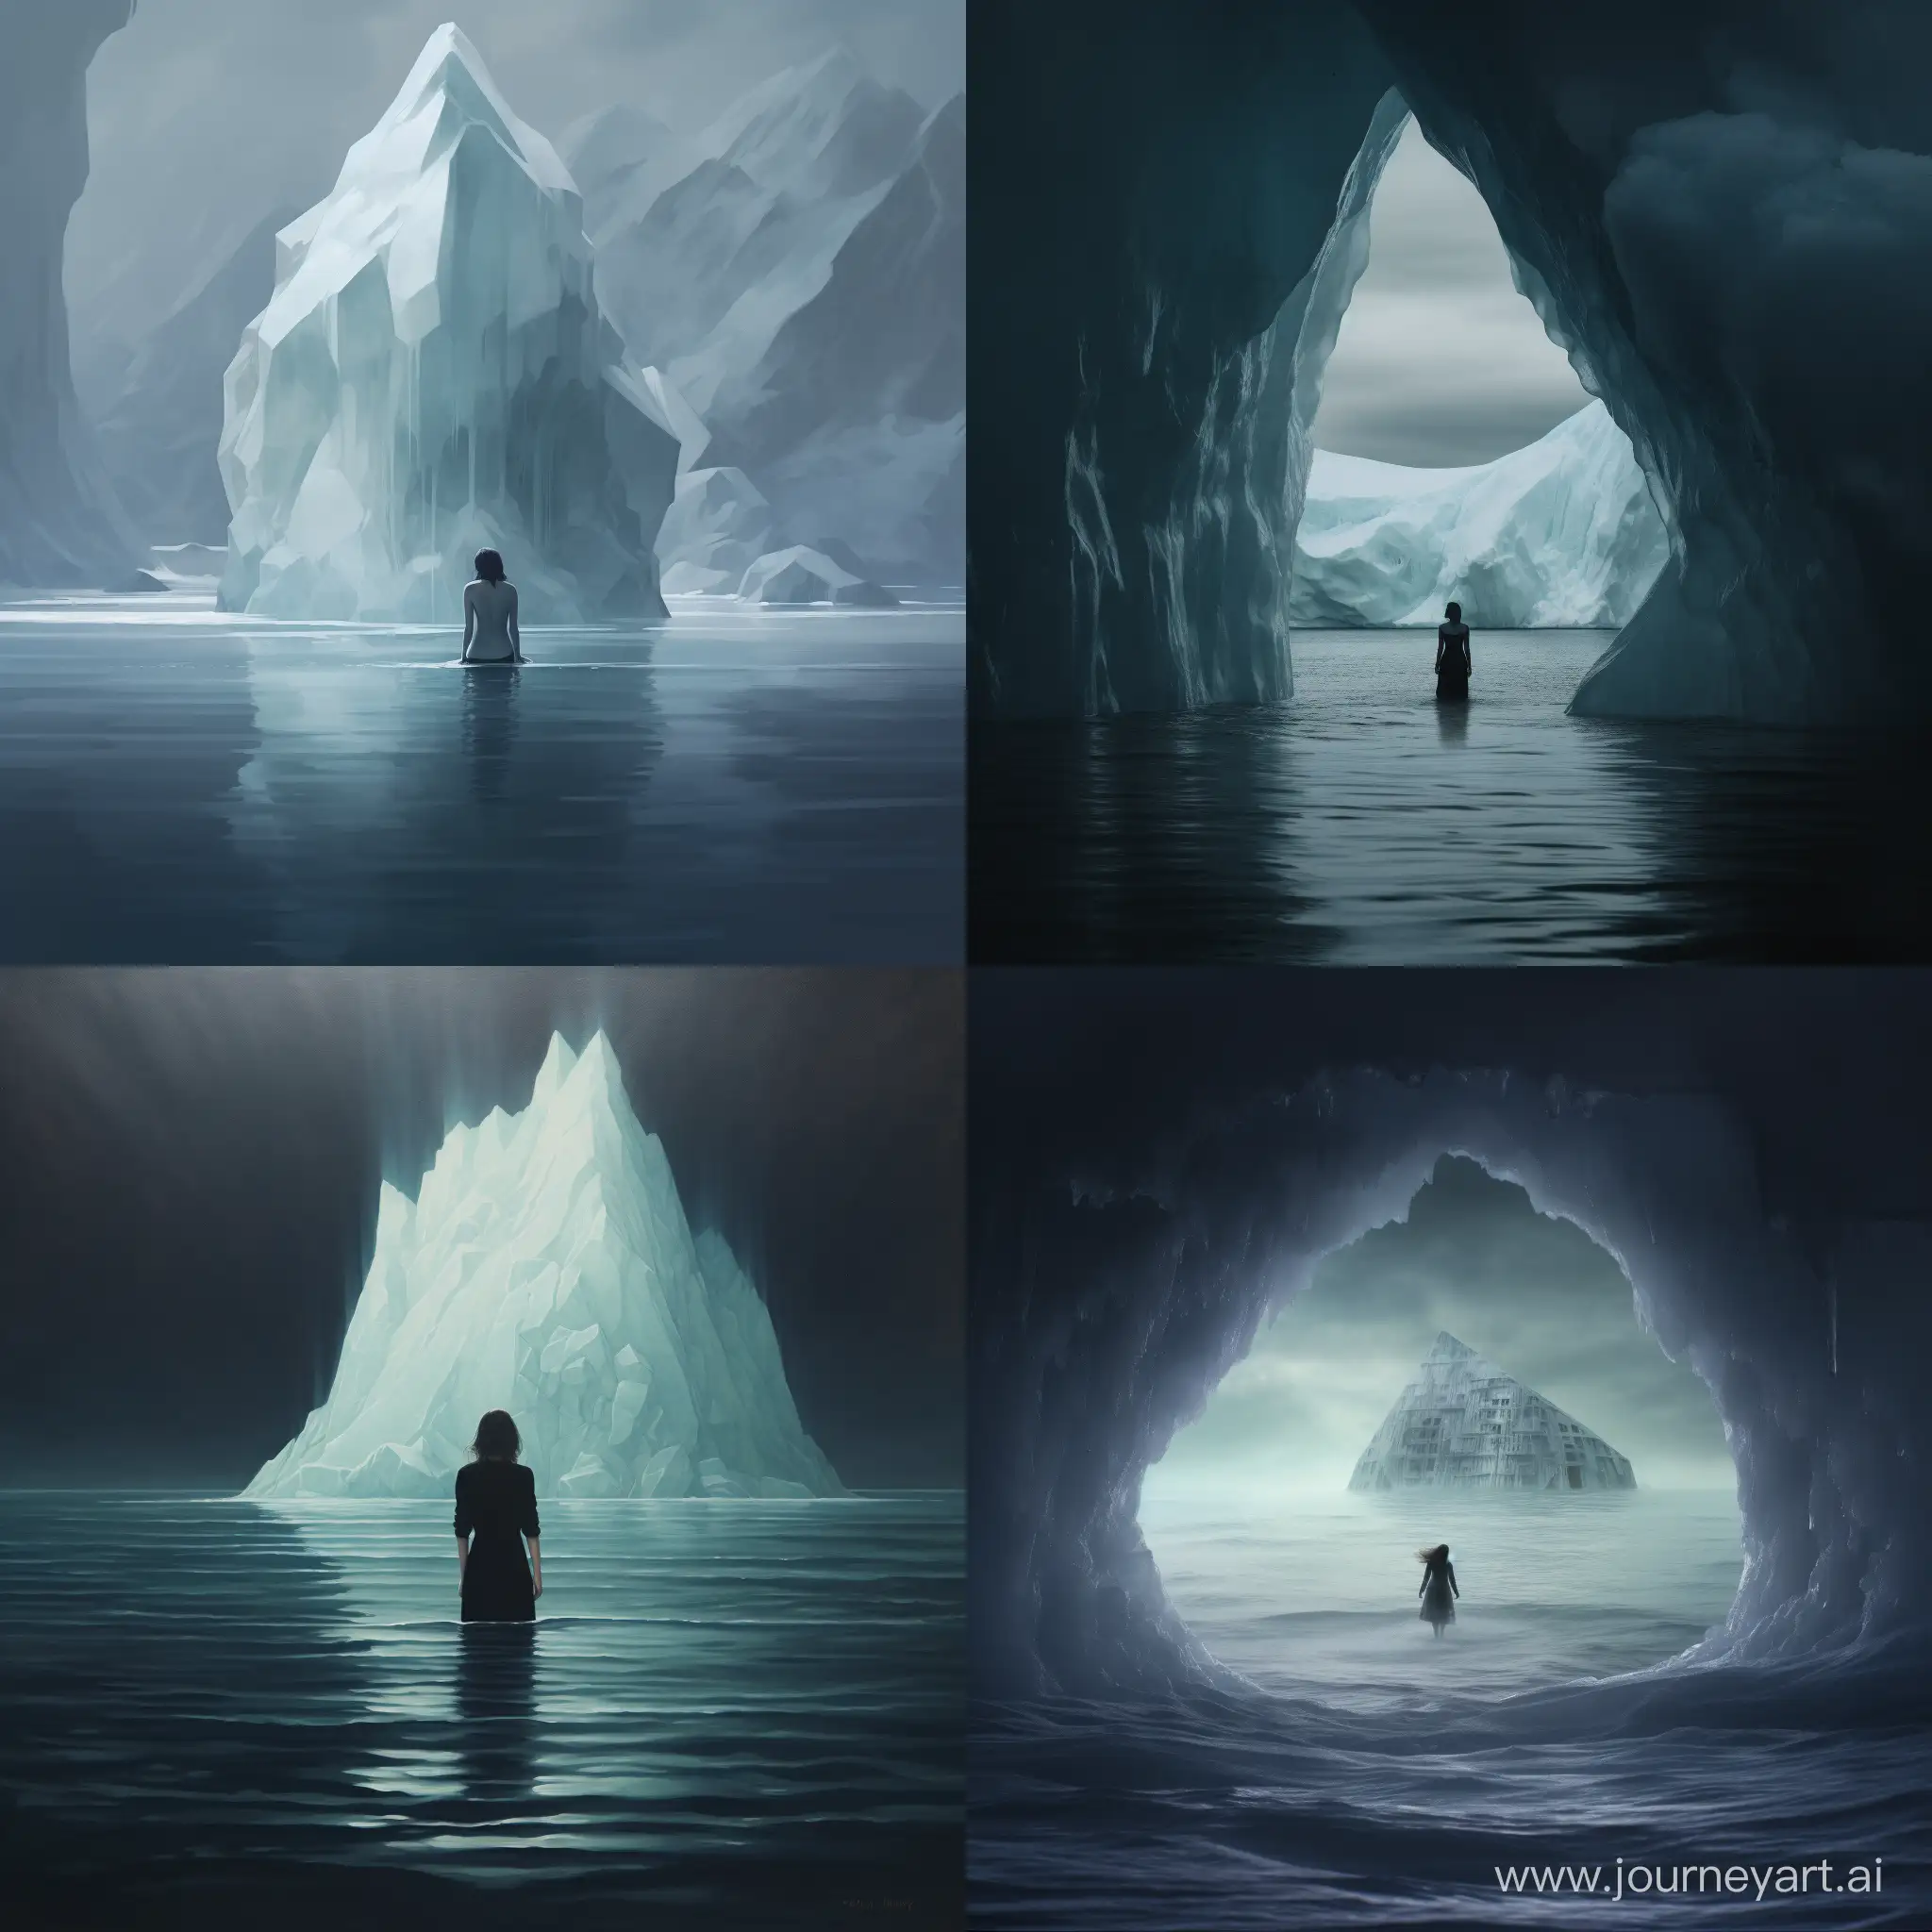 Lonely-Girl-Under-the-Iceberg-A-Surreal-Artistic-Composition